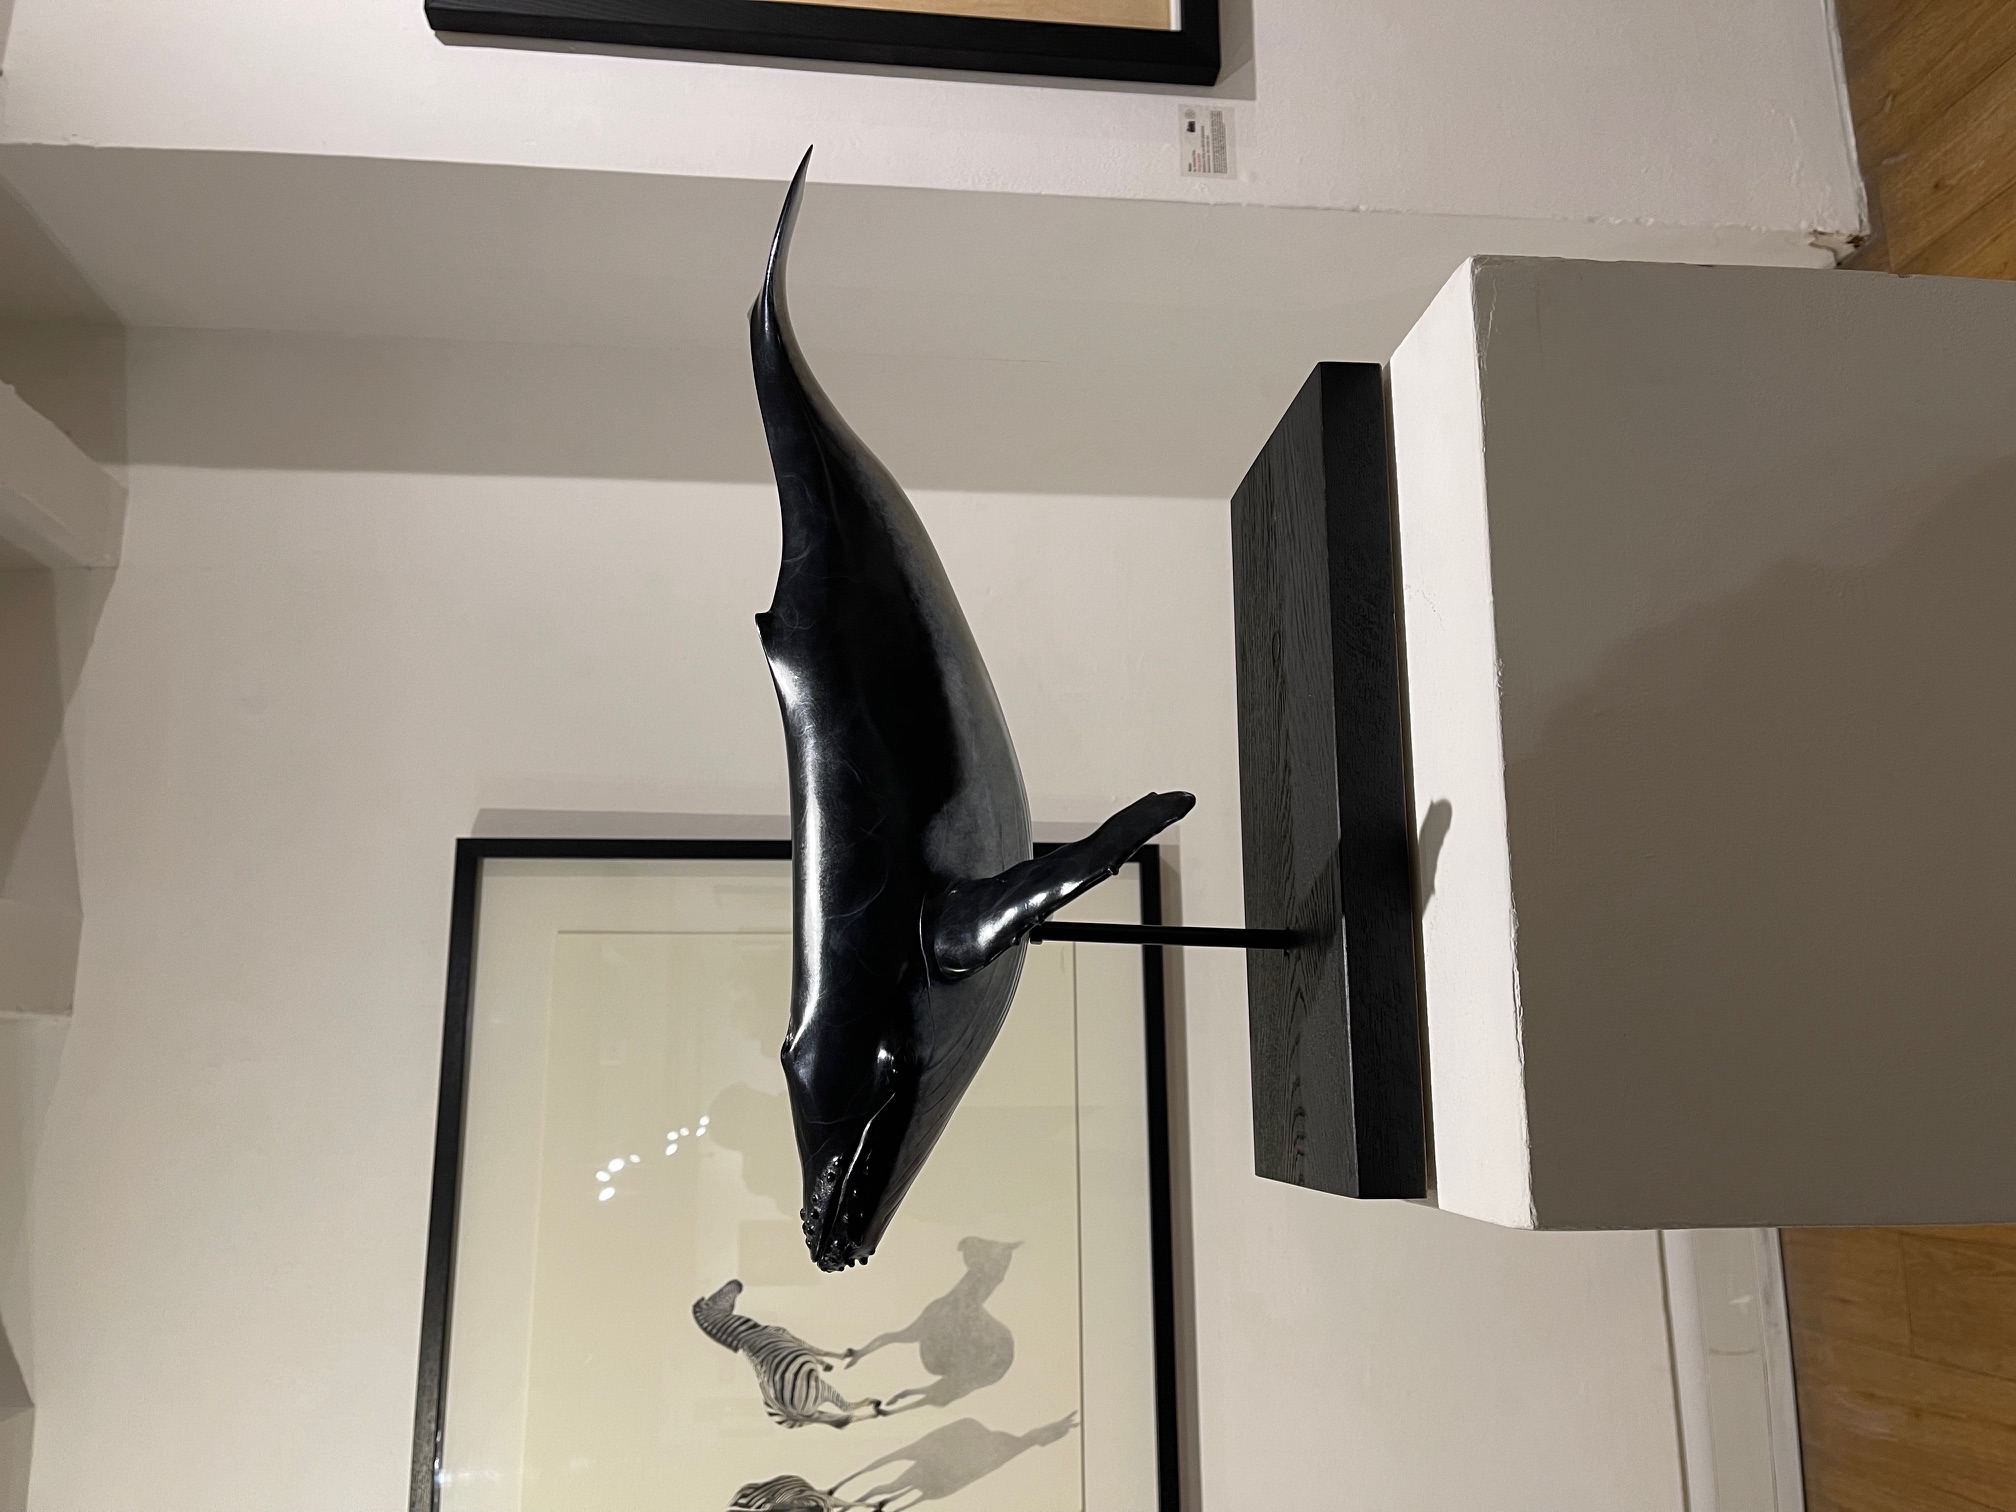 Image of Stephen Rew Whale sculpture